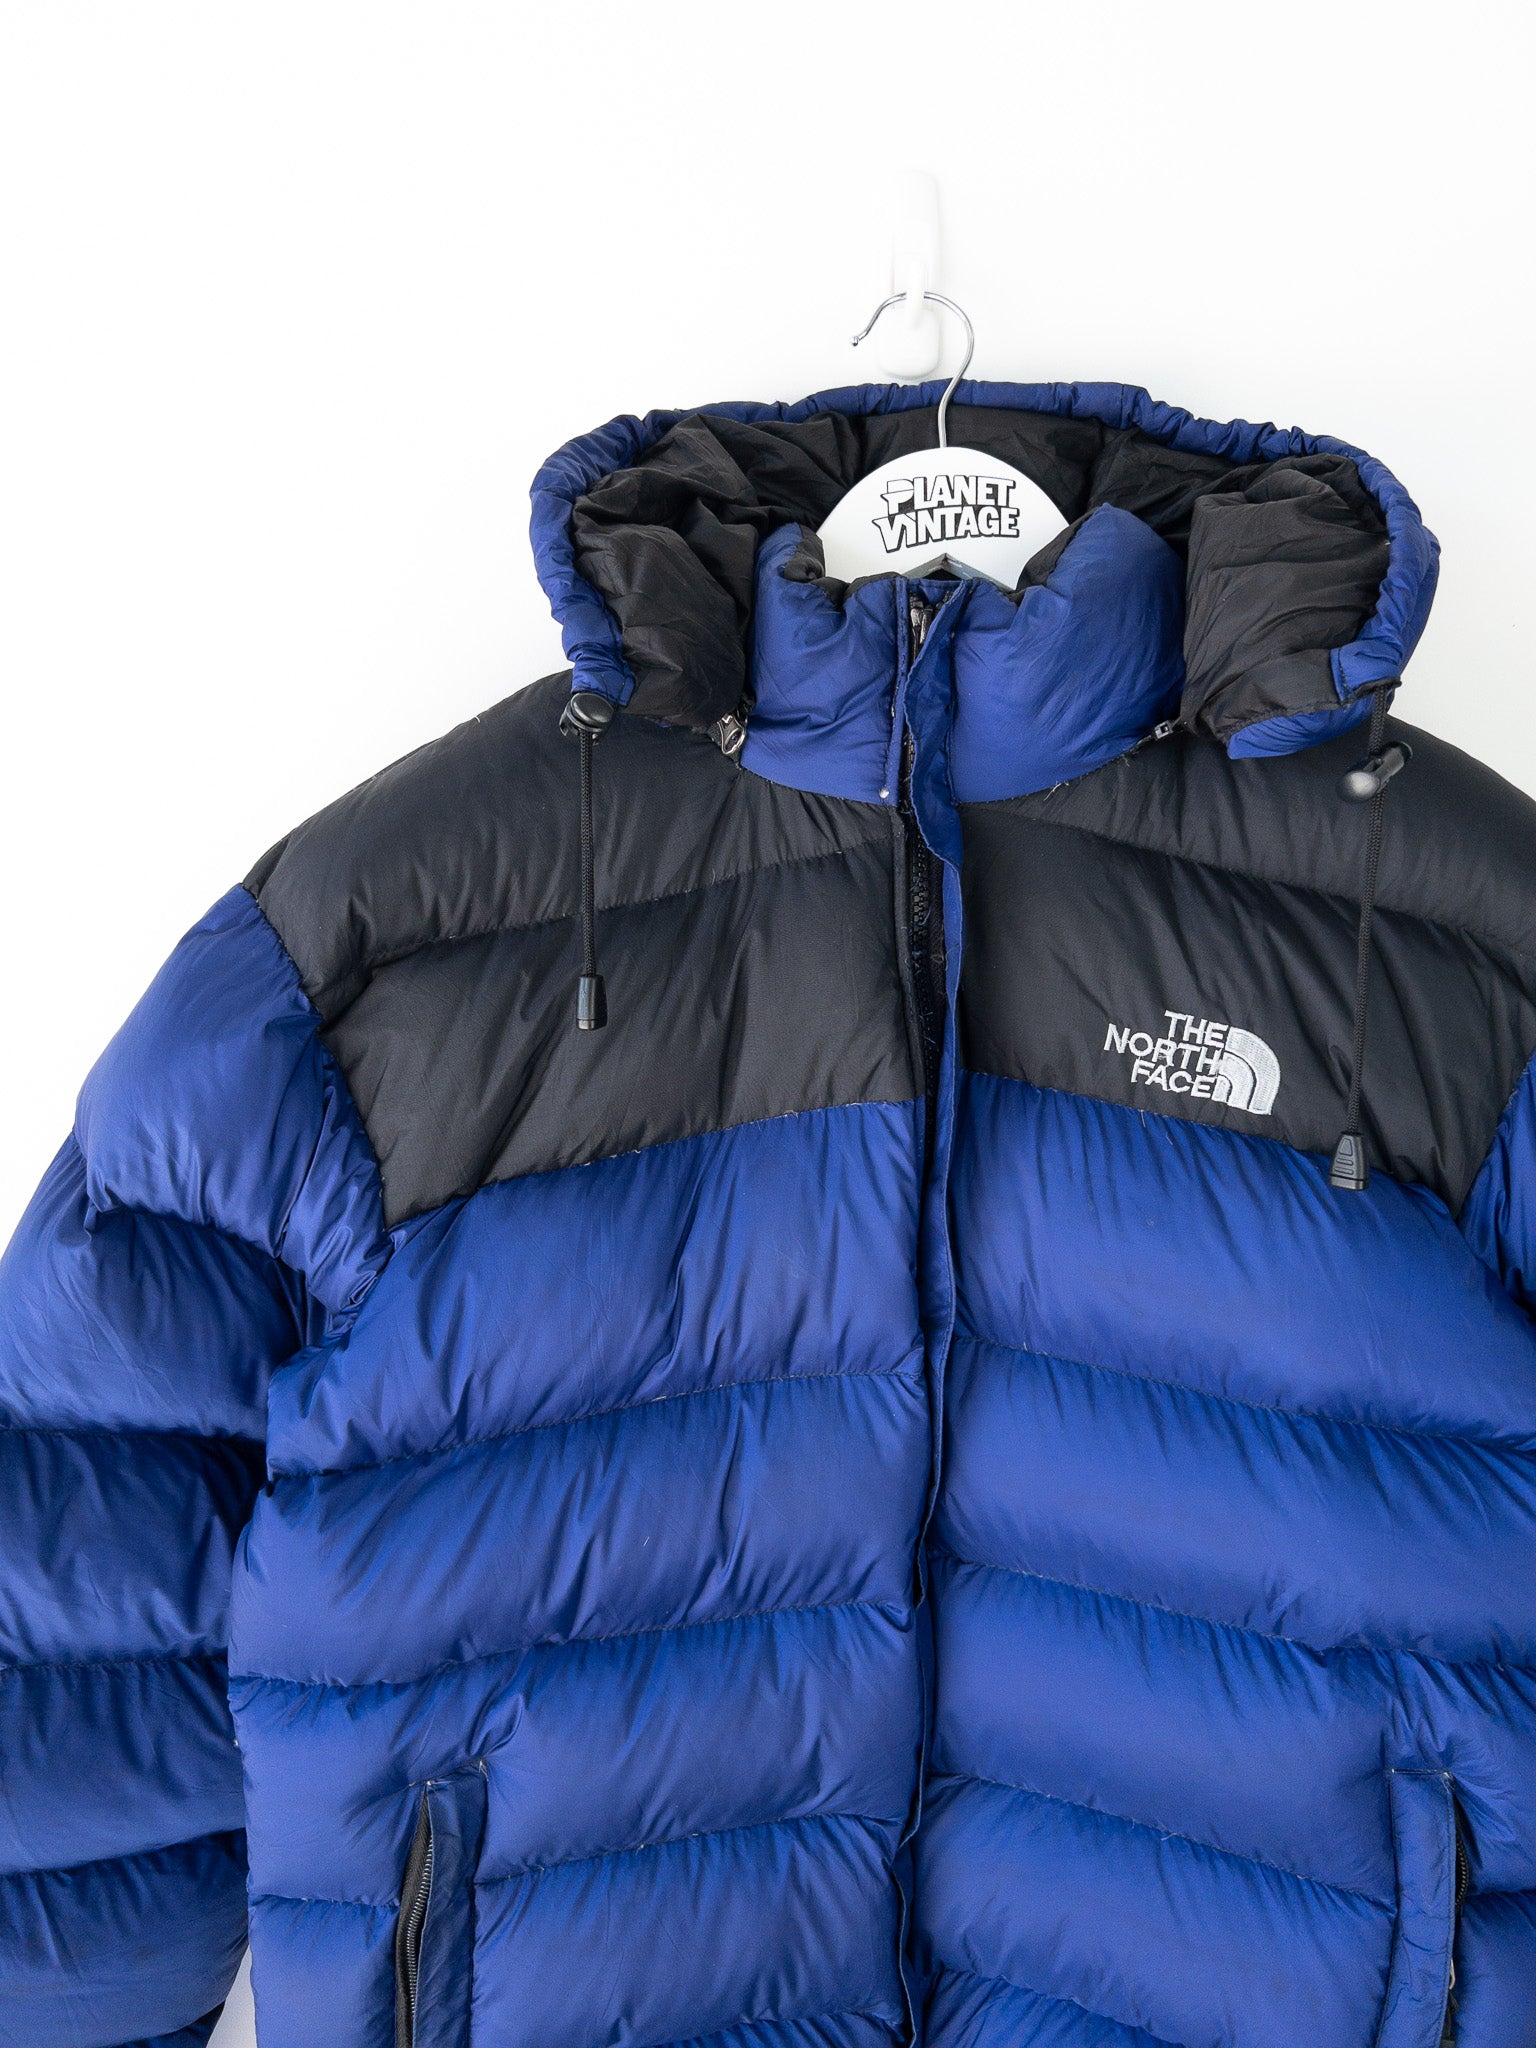 Vintage The North Face Jacket (M)